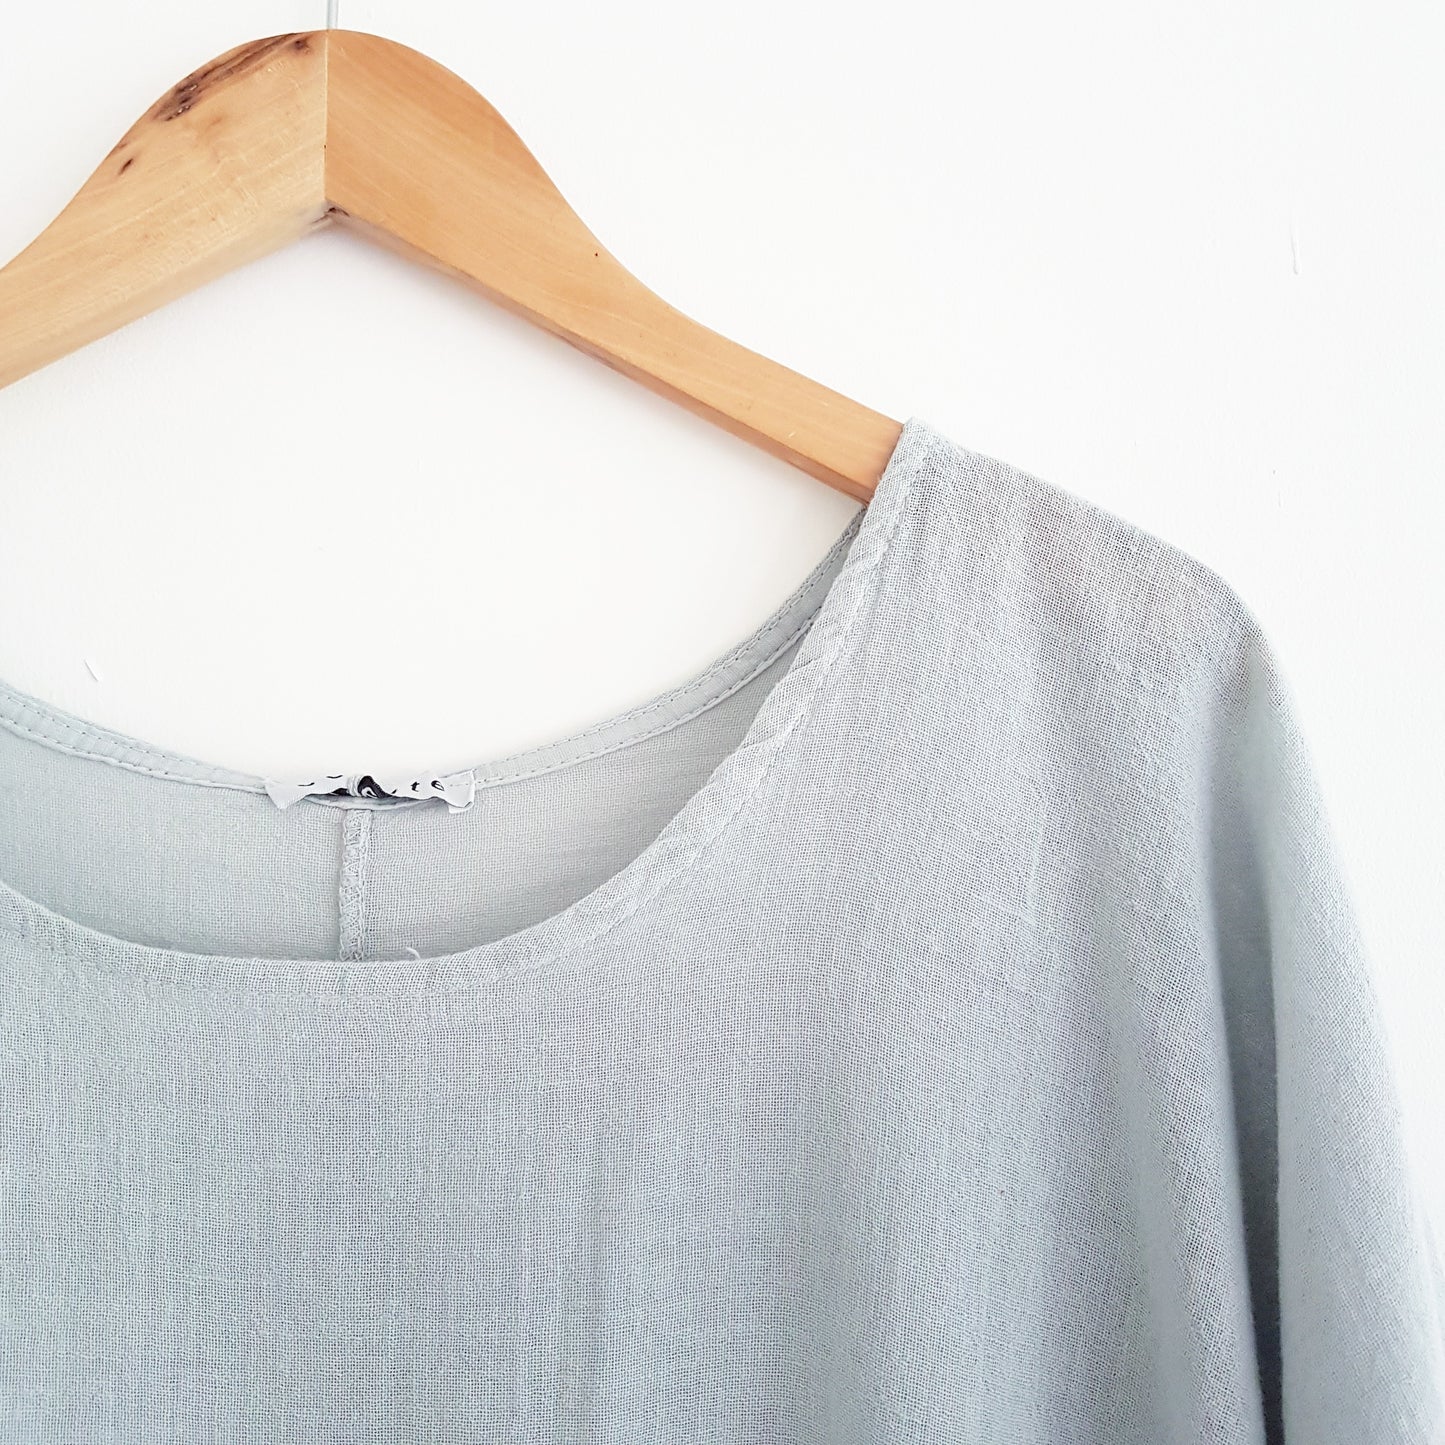 Cropped Linen Top in Silver Sky Blue Grey